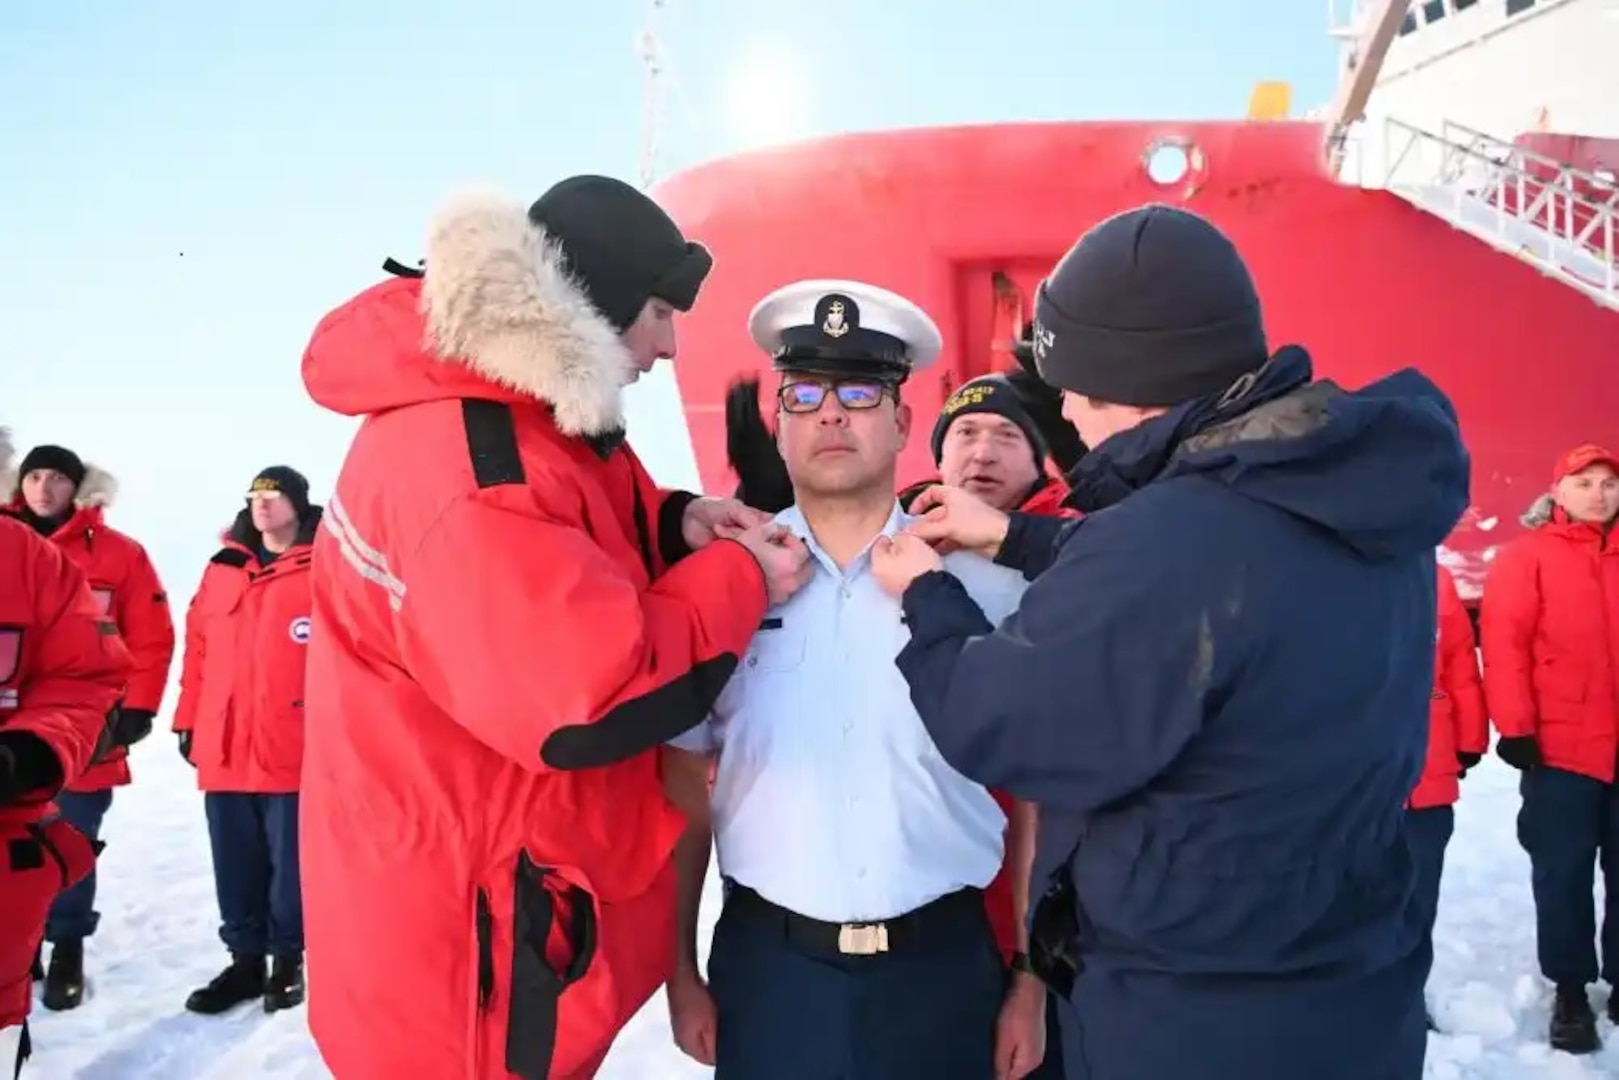 Crewmembers of the U.S. Coast Guard Cutter Healy hold an advancement ceremony for two members at the North Pole, Oct. 2, 2022. Senior Chief Petty Officer James McArdle (background) exchanges covers for Chief Petty Officer Roy Mesen Scott (center), as Chief Petty Officer Eric Heyob (left) and Petty Officer First Class Michael Underwood (right) replace his collar insignias. U.S. Coast Guard photo by Auxiliary Public Affairs Specialist 1 Deborah Heldt Cordone.